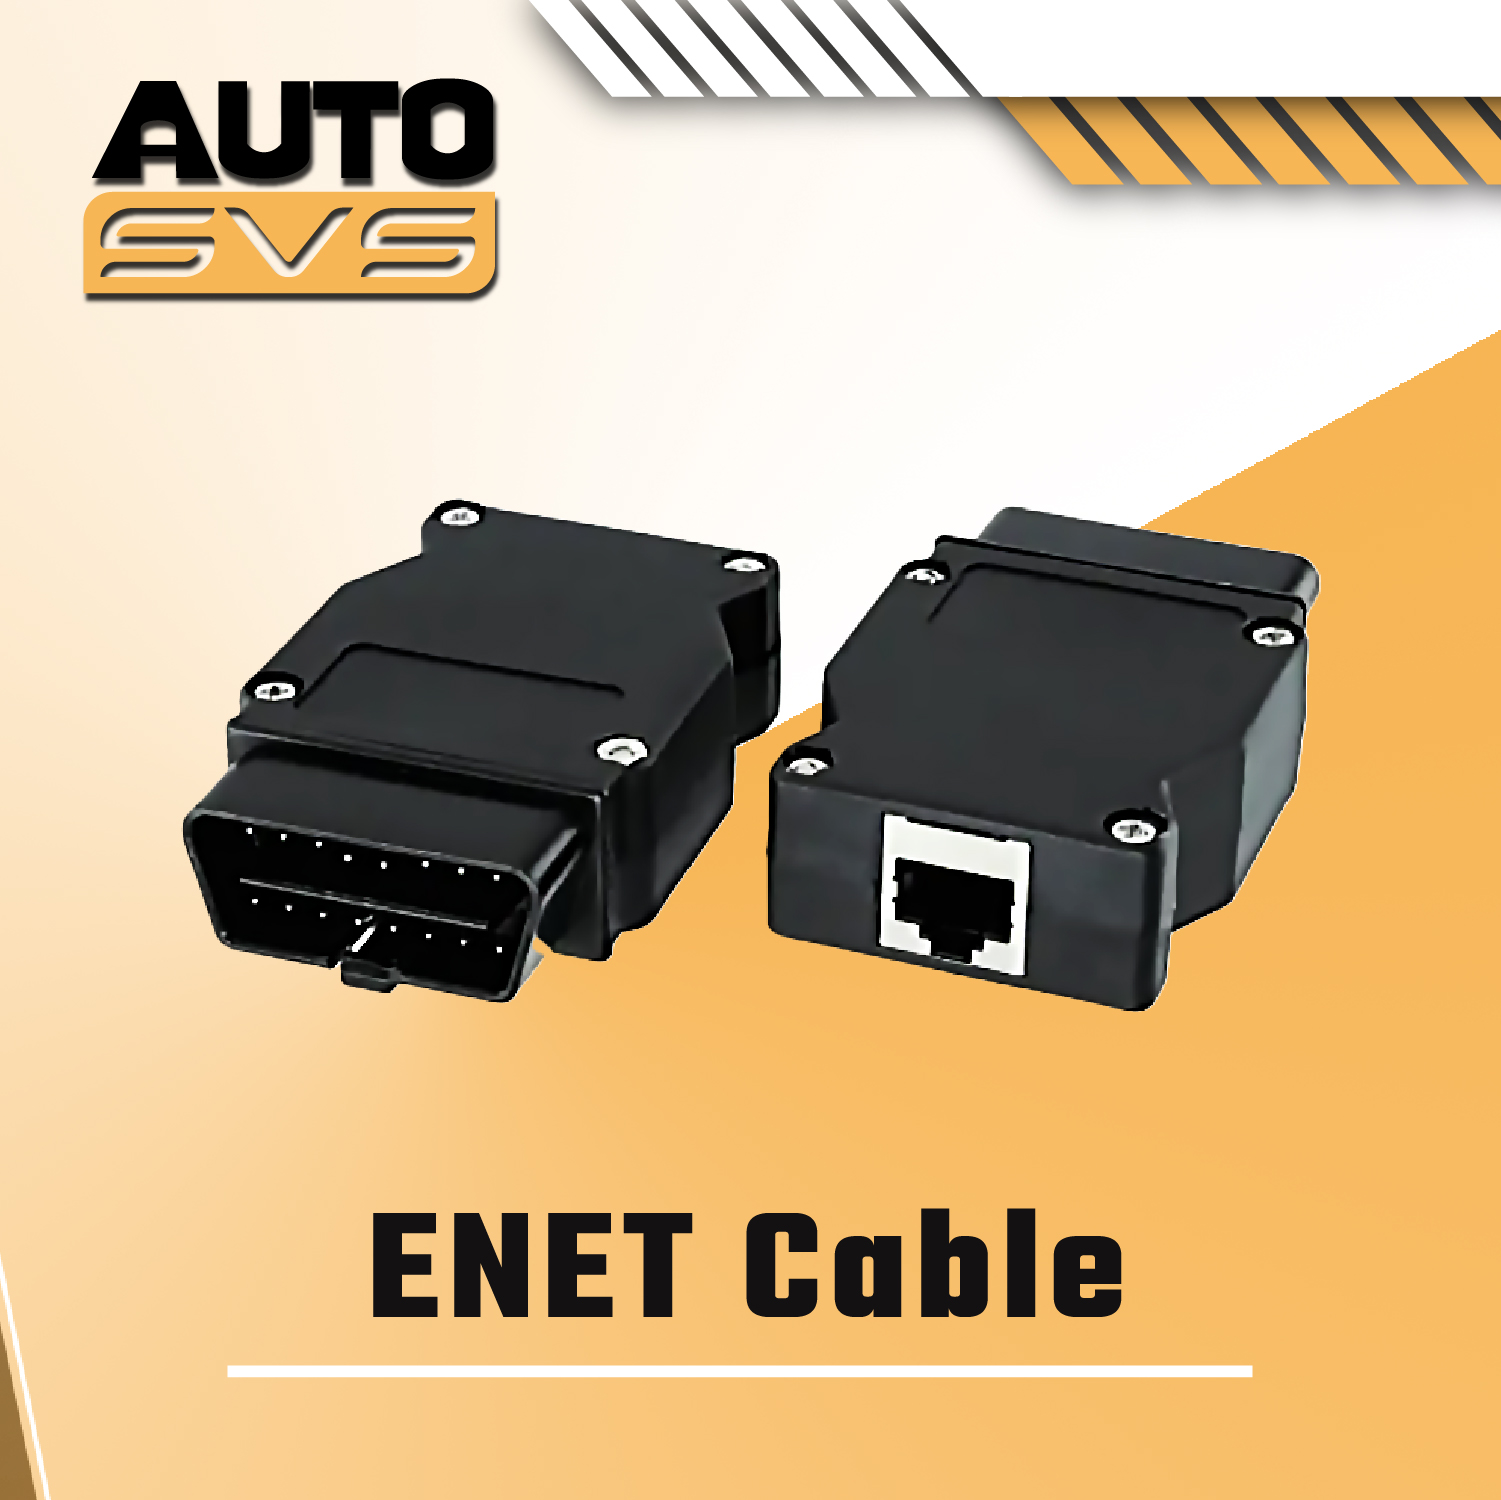 Autosvs on X: The OBD2 to Enet Cable V2 – J1962 A to RJ45 Ethernet is the  adapter for BMW Coding / Programming / Diagnostics on F/G/I series cars  (using BMW E-SYS